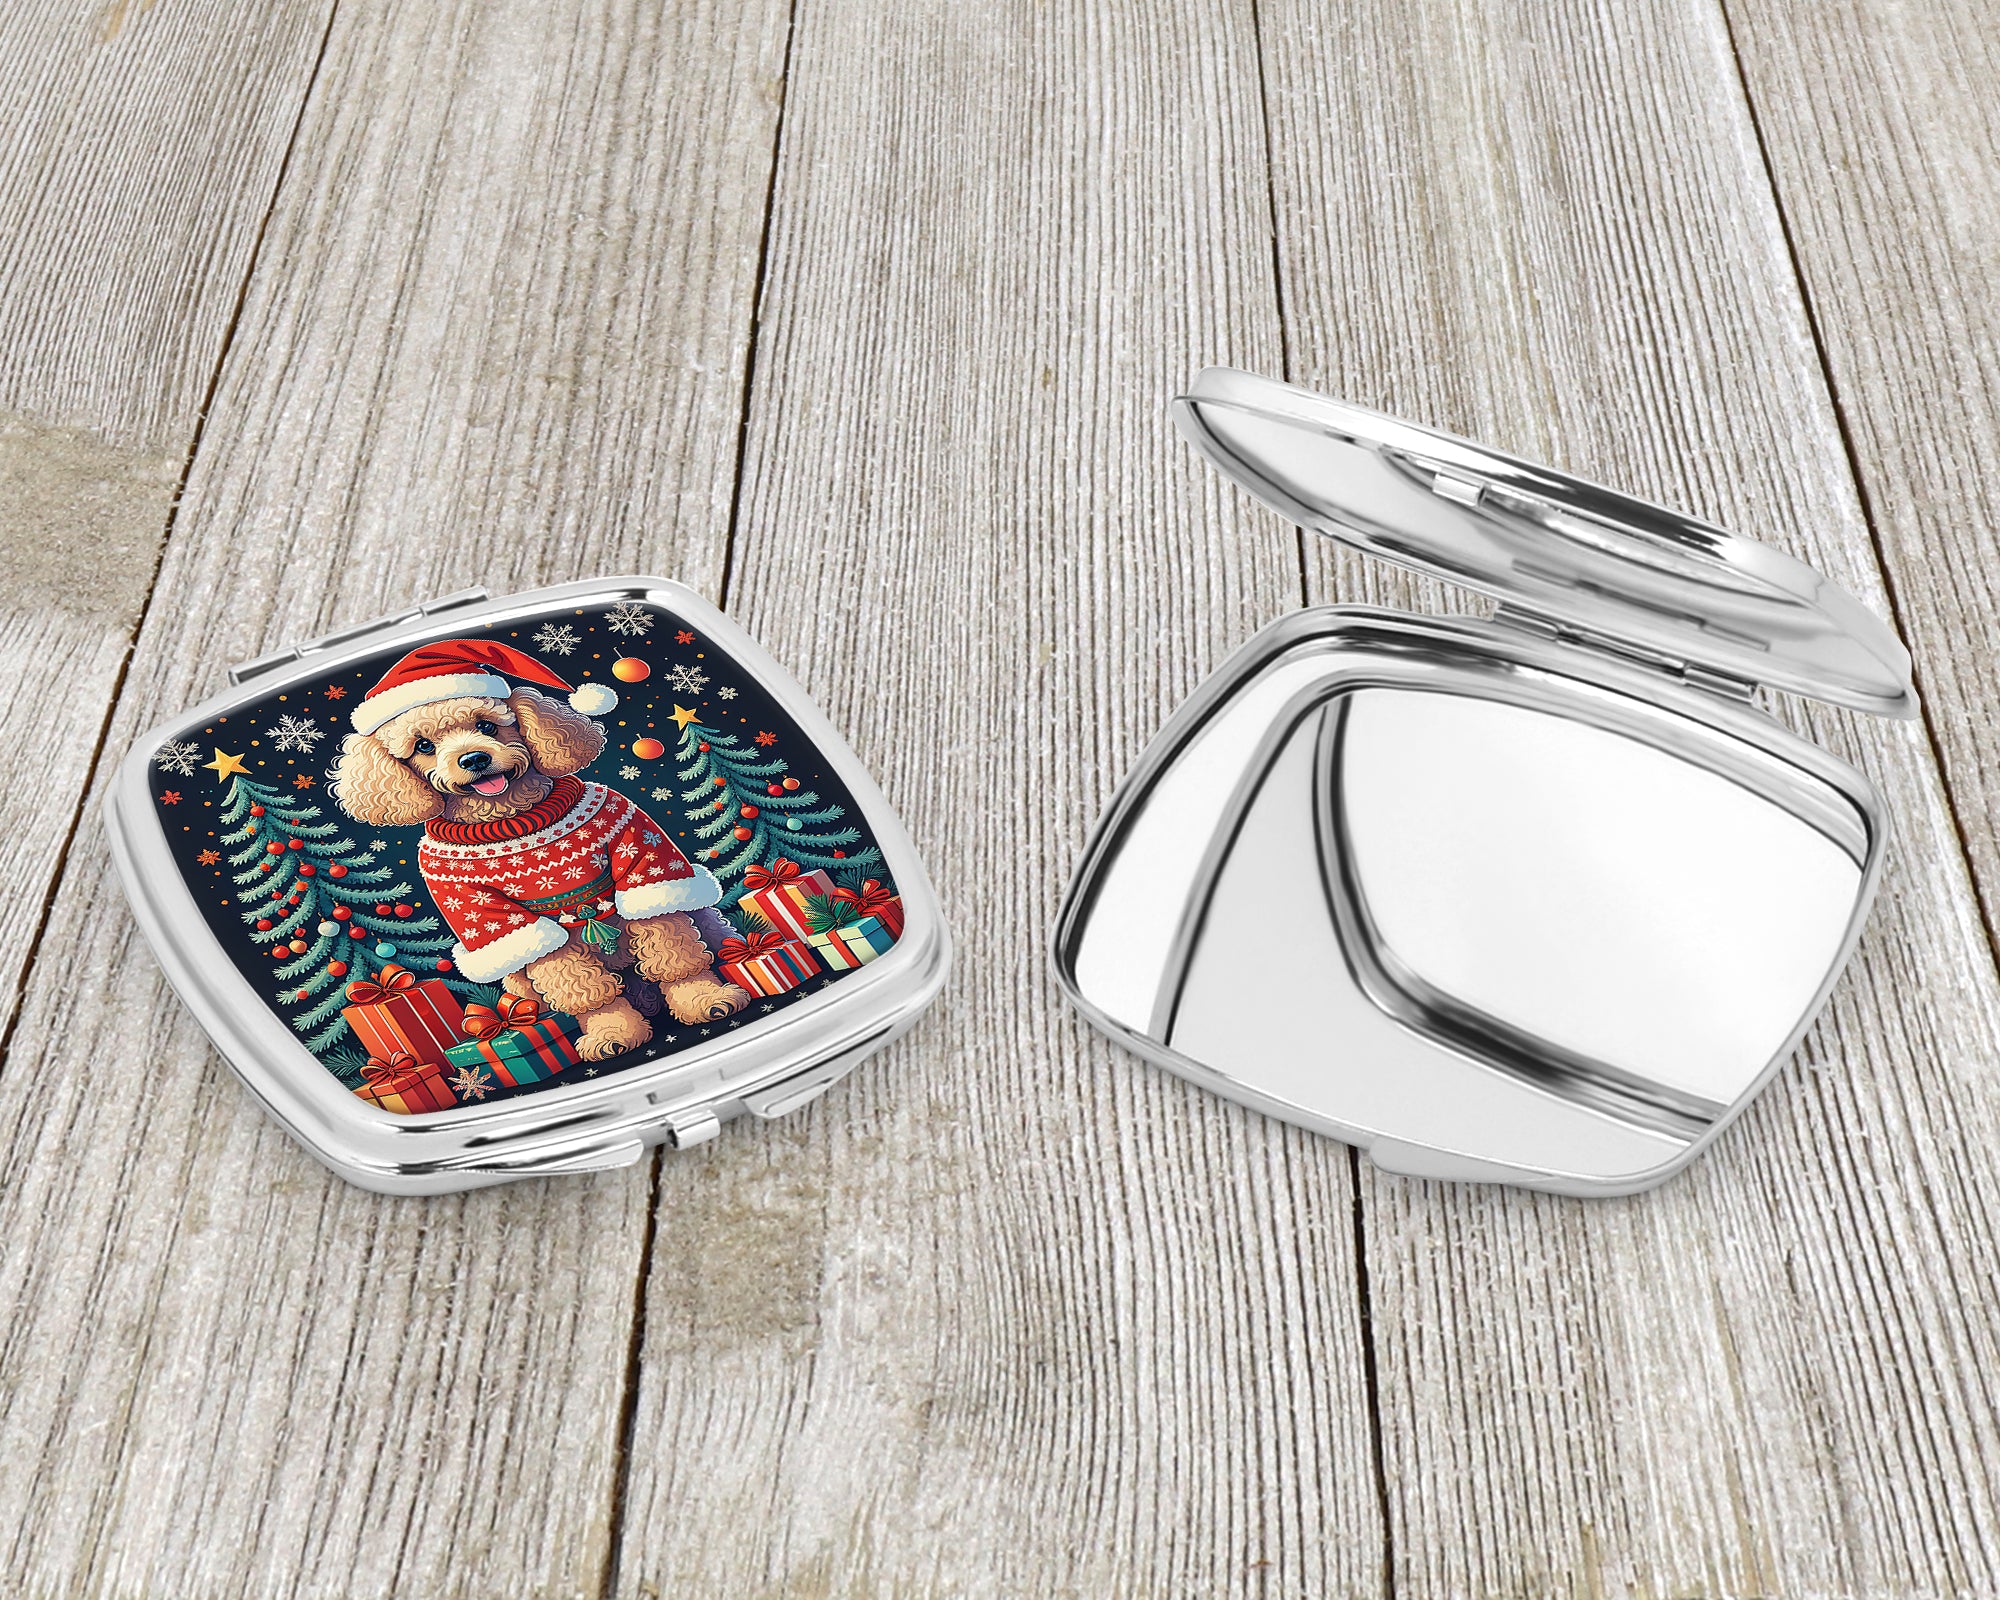 Apricot Toy Poodle Christmas Compact Mirror